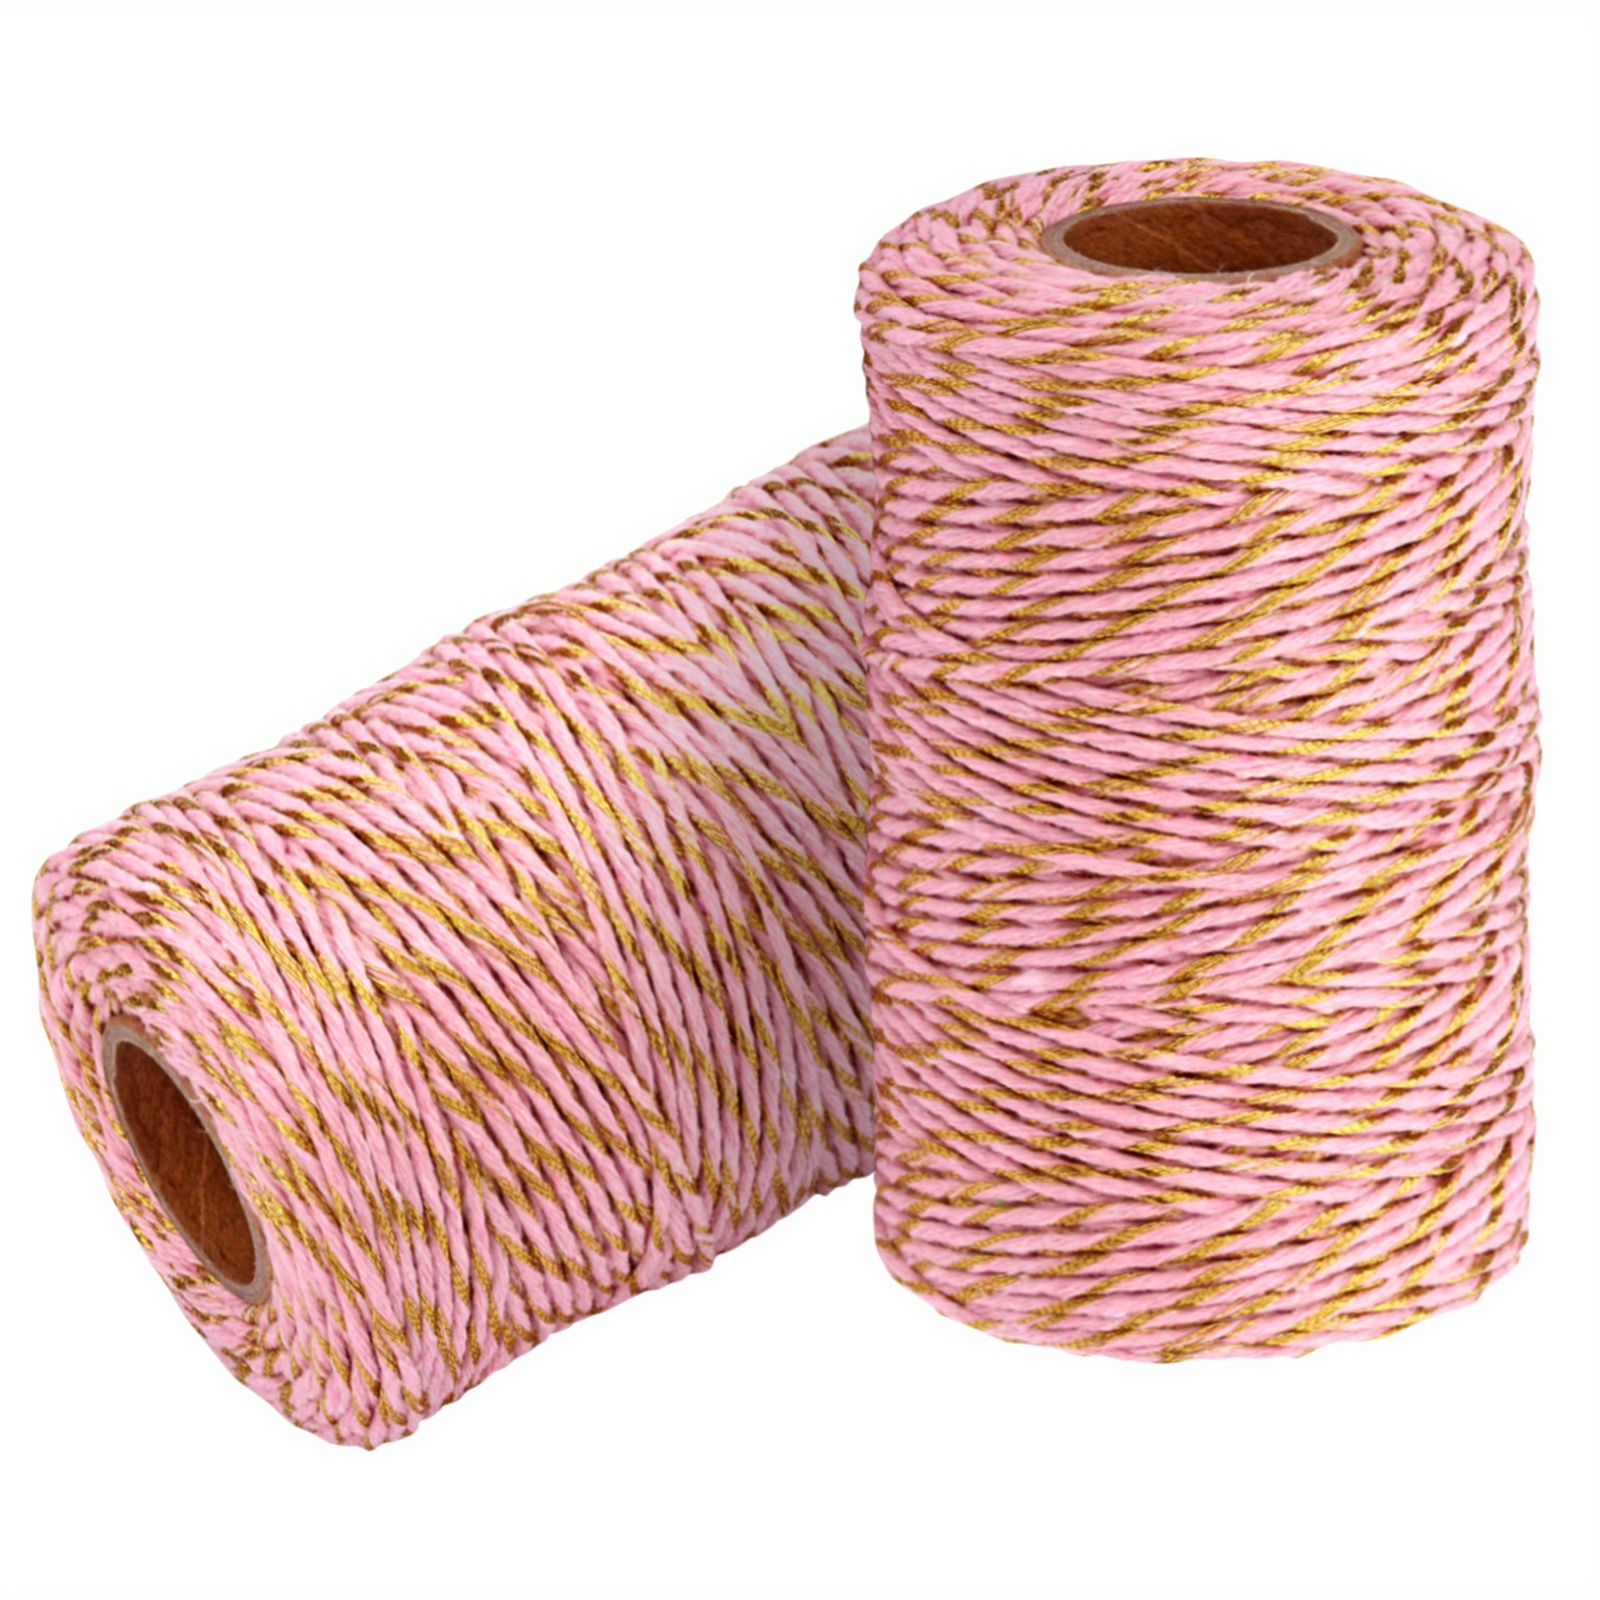 Red/white Baker's Twine 10 Yards, 2 Ply Cotton Twine 